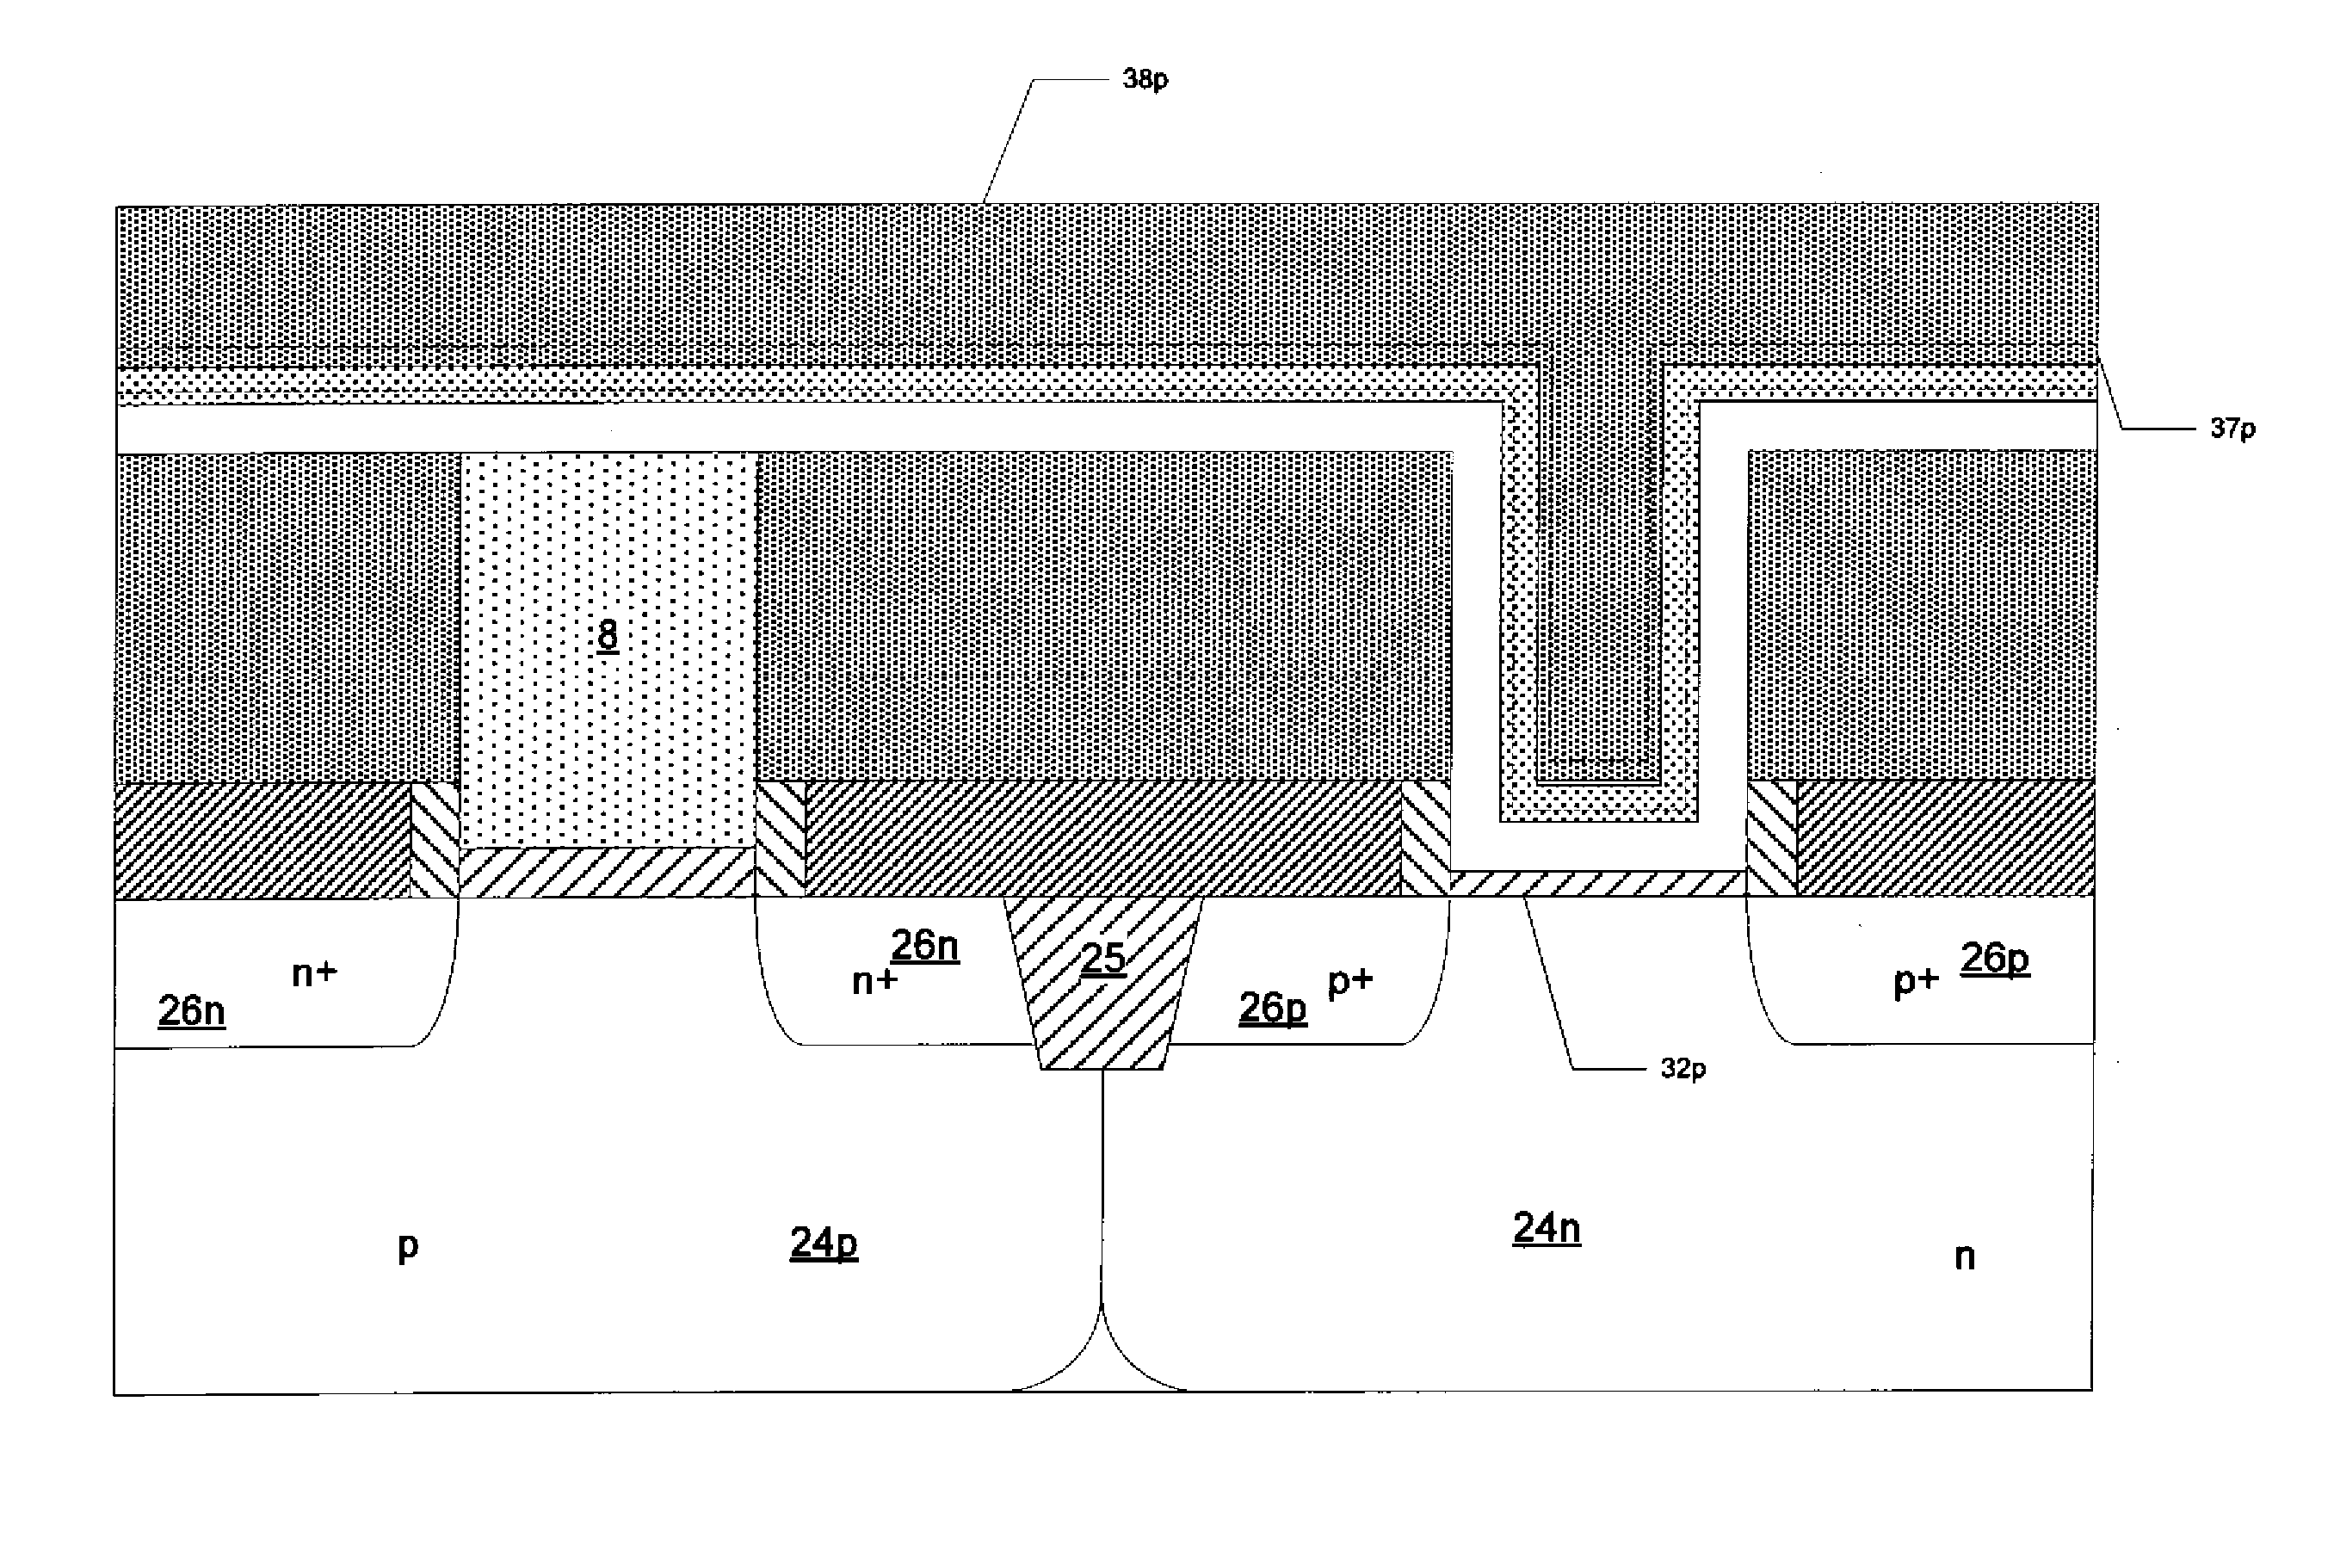 Replacement Metal Gate Process for CMOS Integrated Circuits